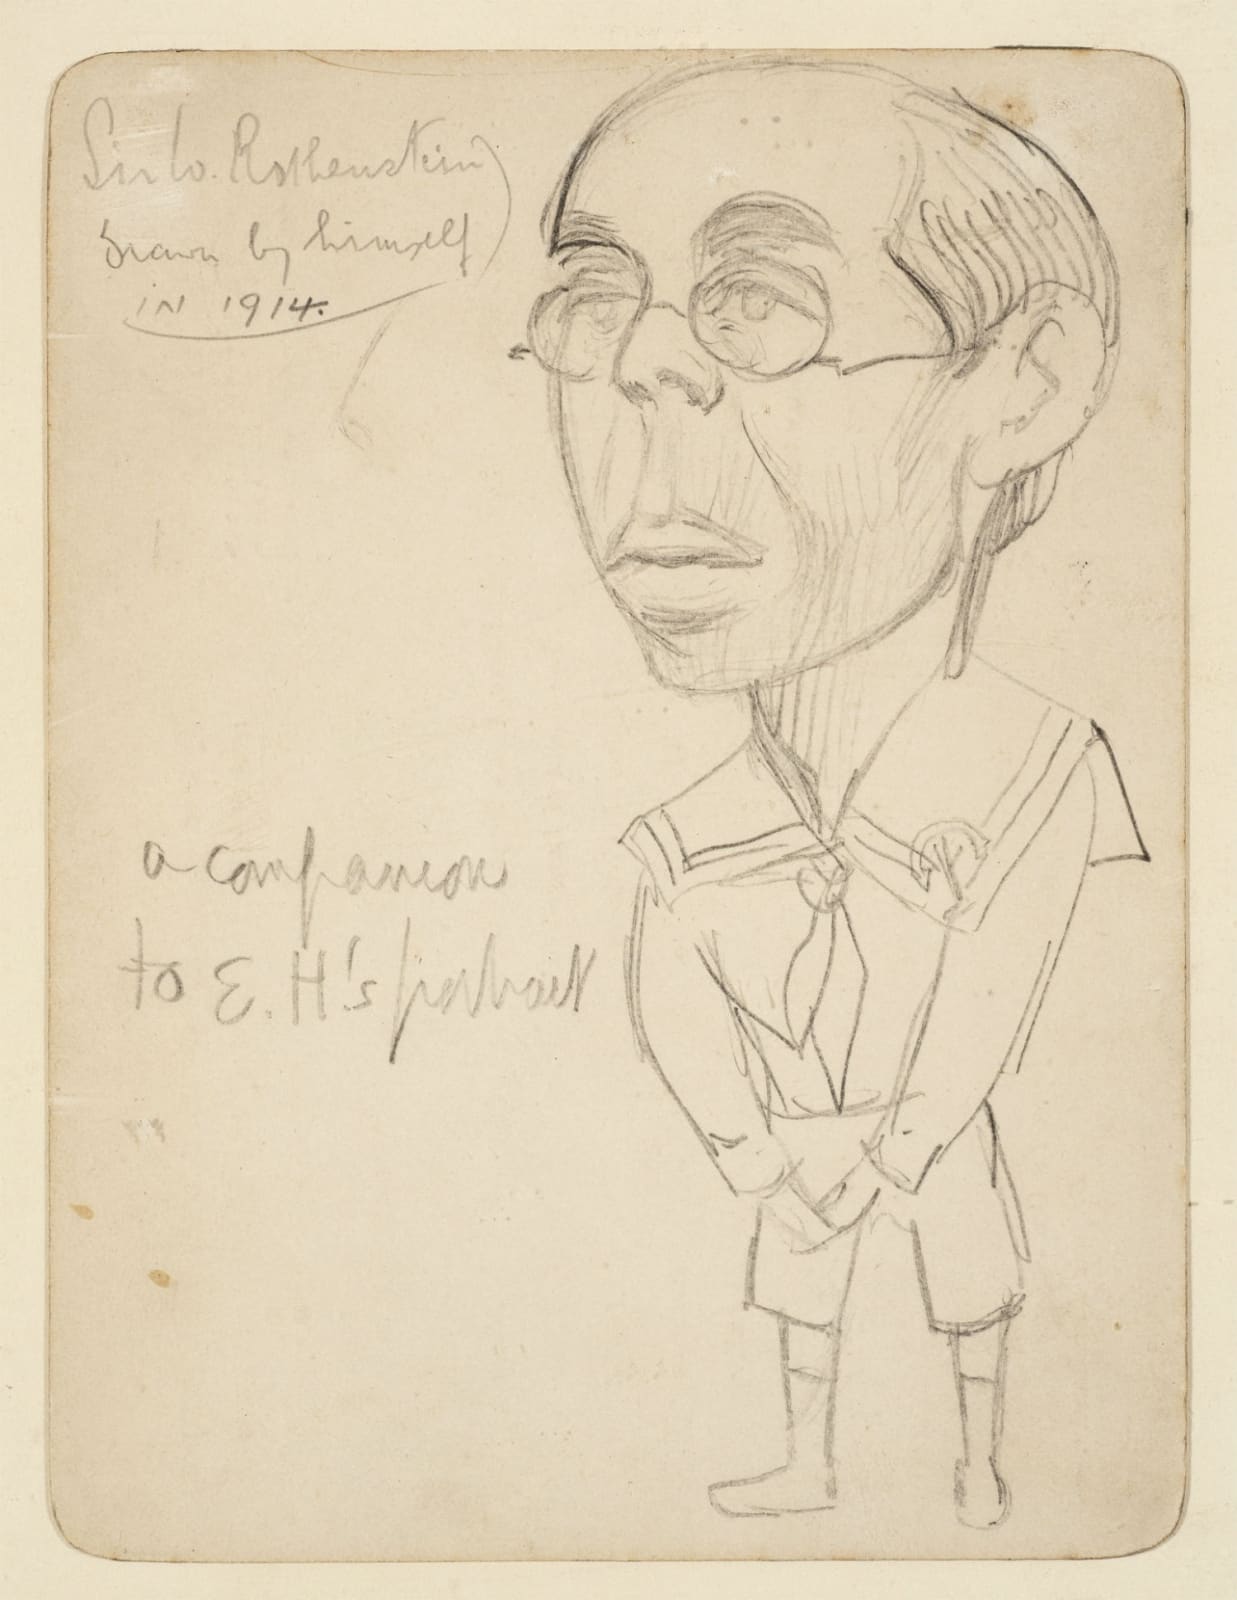 William Rothenstein (1872-1945) Self Portrait 1914 Pencil on paper 15.24 x 11.43 cm Ben Uri Collection To see and discover more about this artist click here